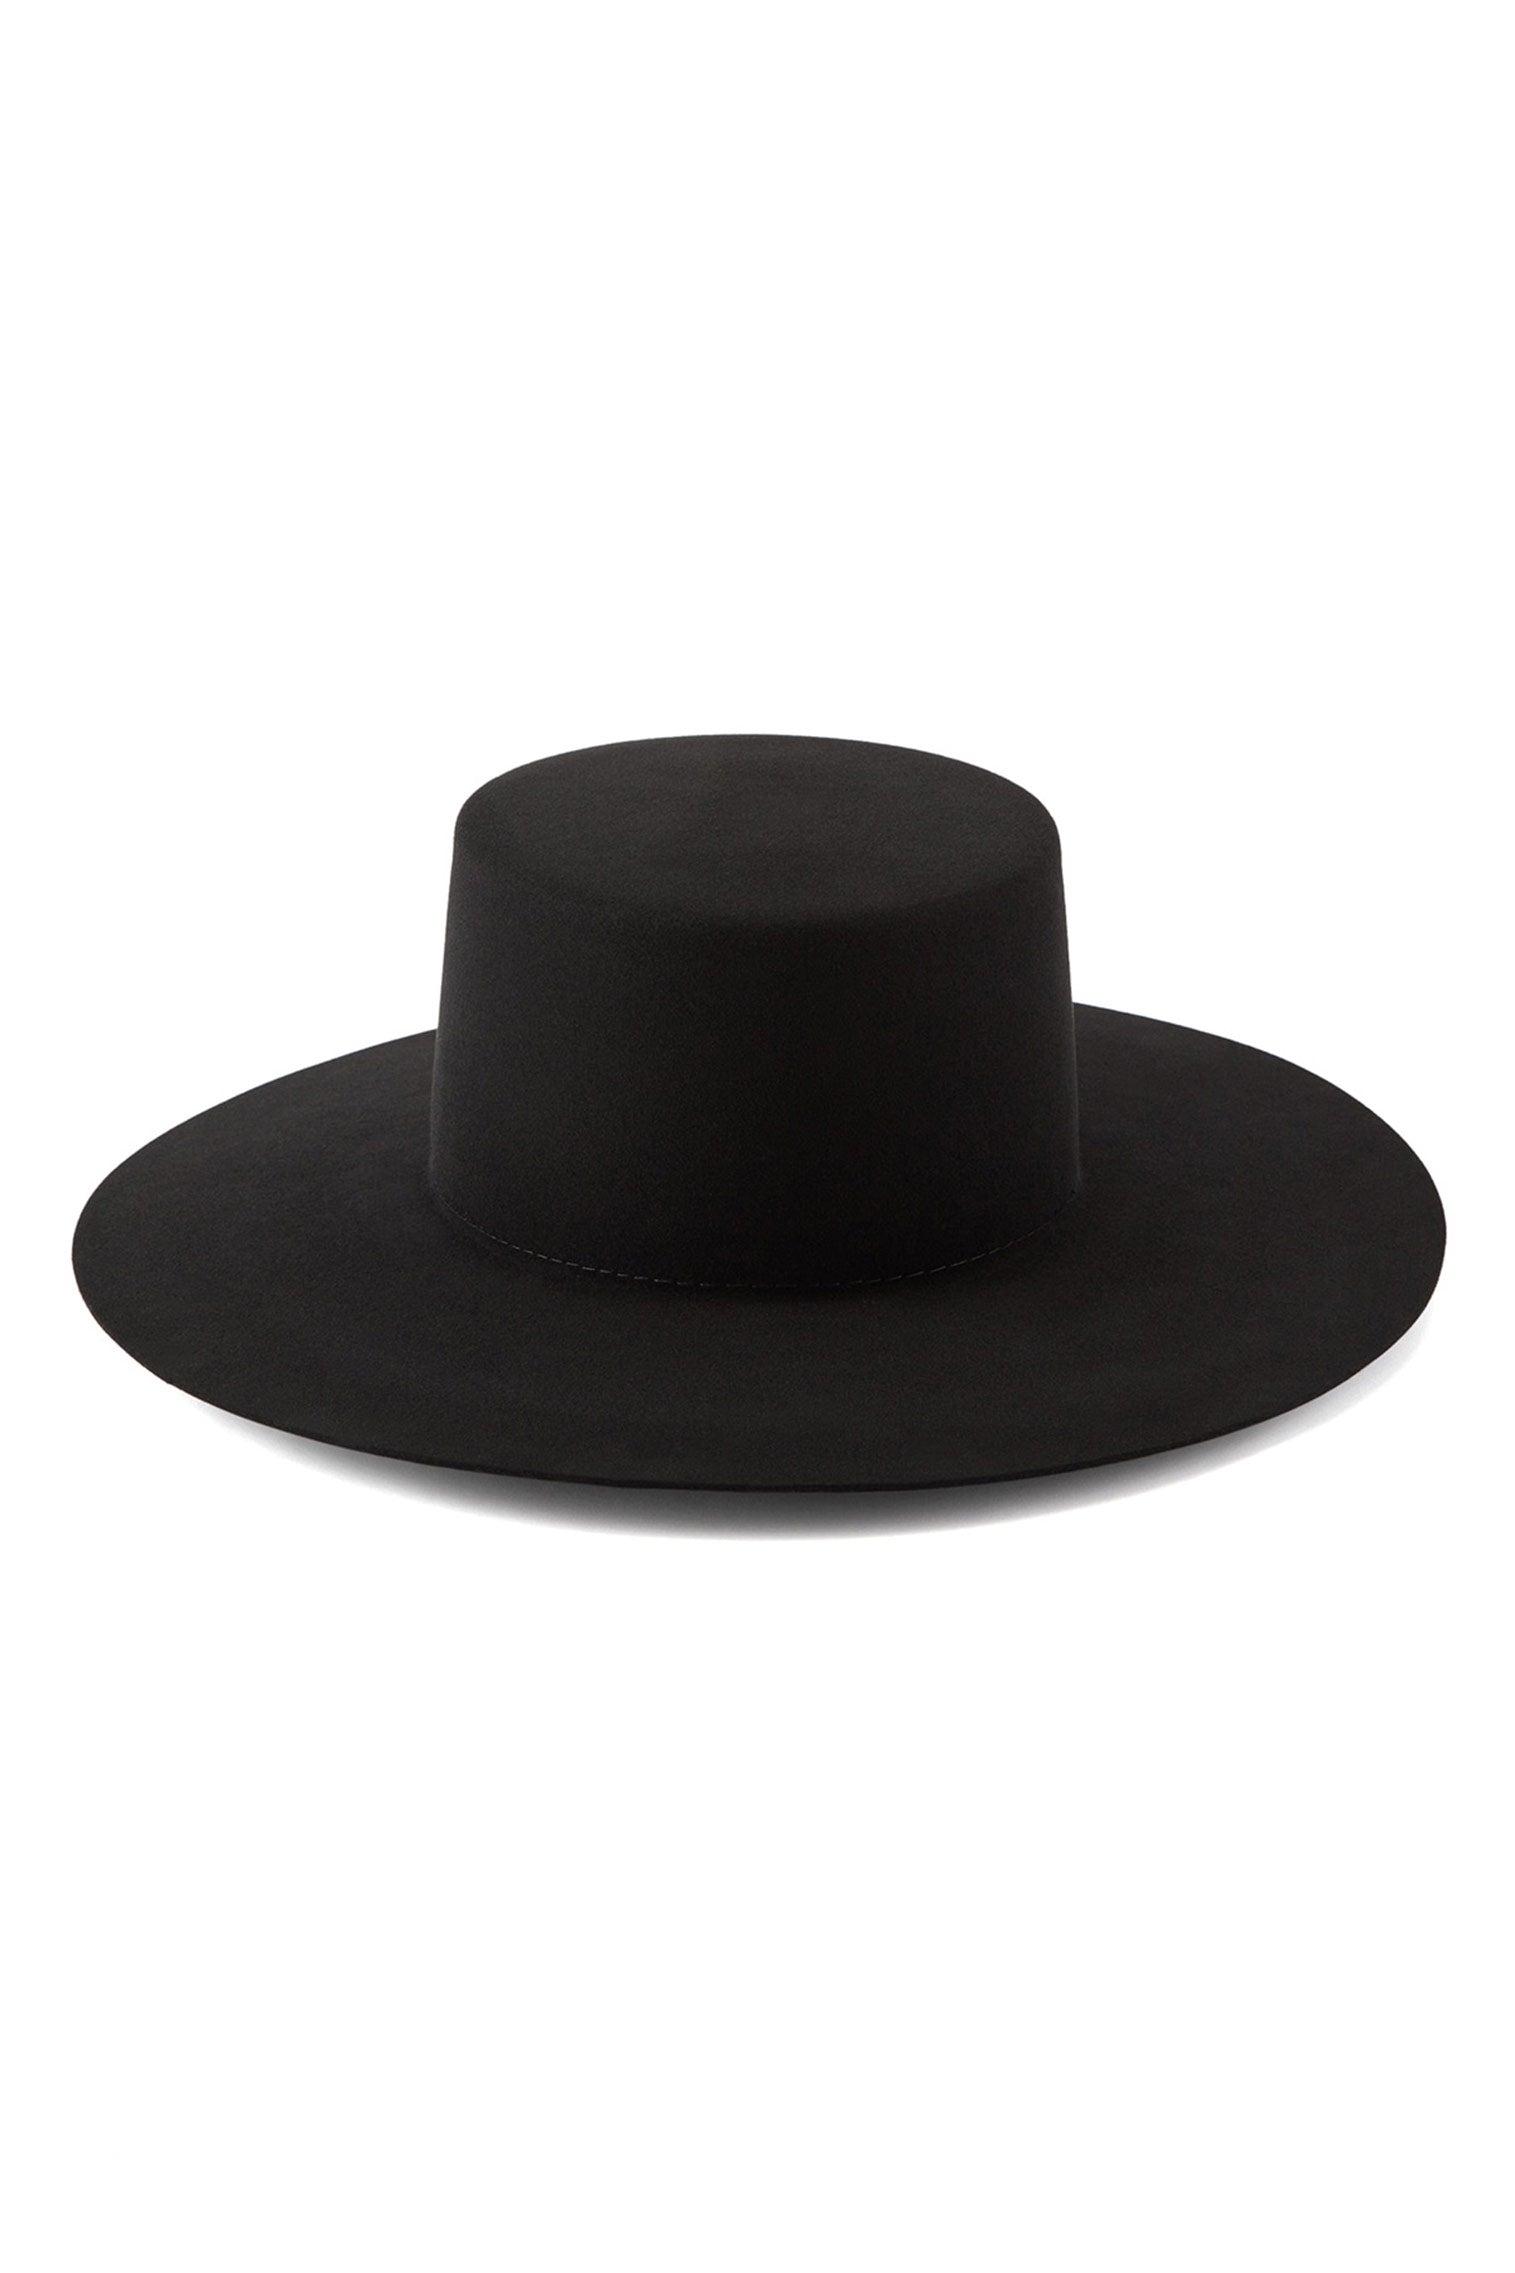 The Vicenzo - Hats for Tall People - Lock & Co. Hatters London UK